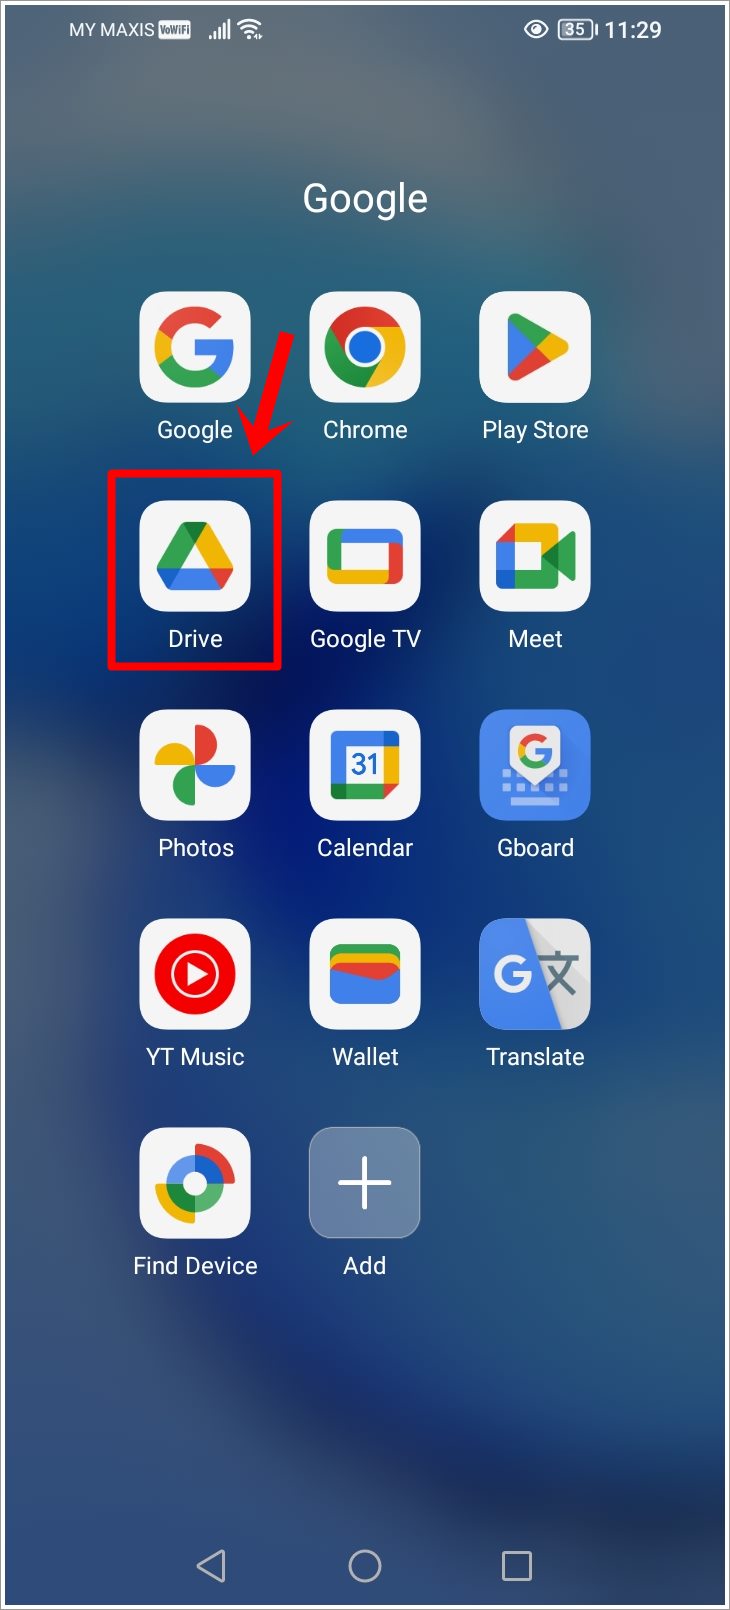 This screenshot shows an Android phone's screen, with the Google Drive app icon prominently highlighted.